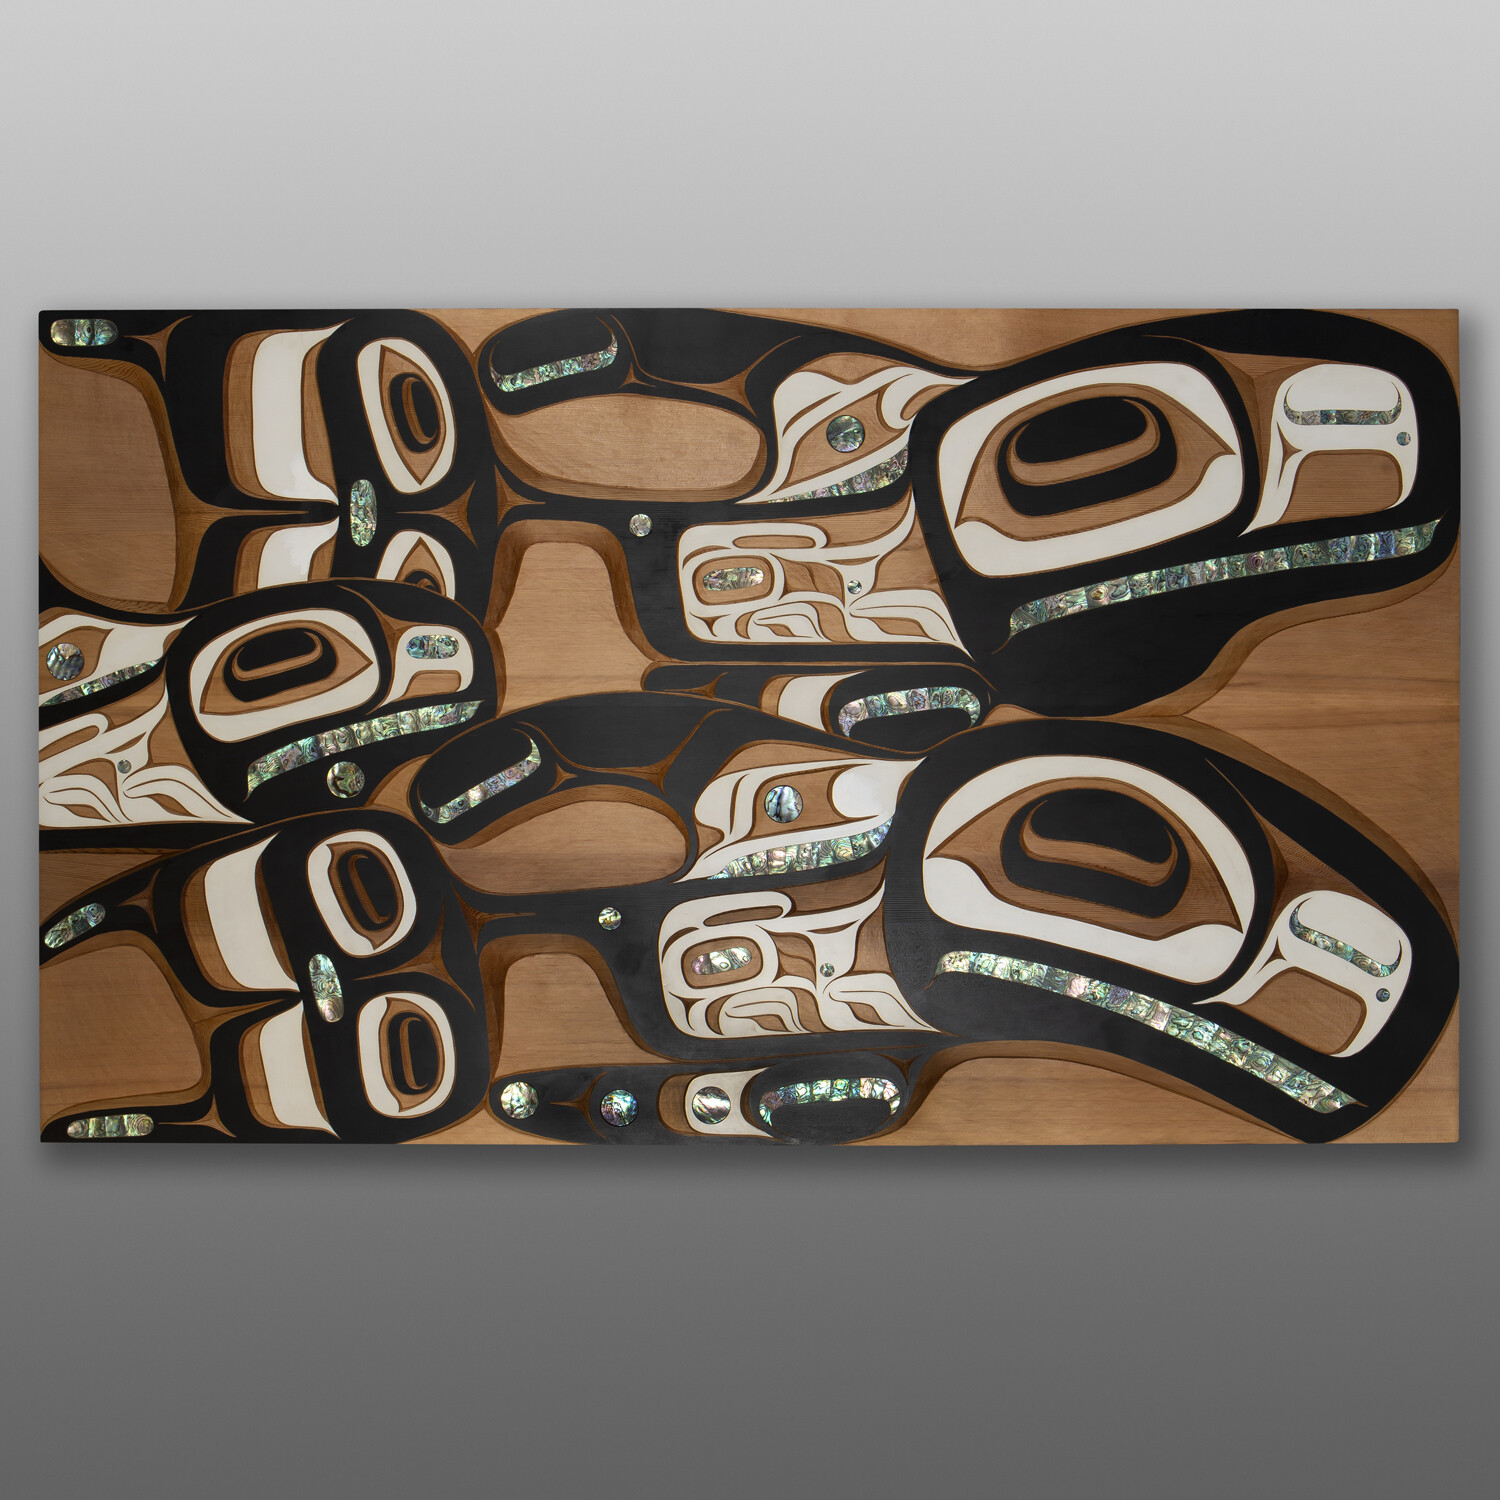 Teaching How to Hunt
Moy Sutherland
Nuu-chah-nulth
Red cedar, abalone, paint
60” x 36” x 1¾”
$28,000